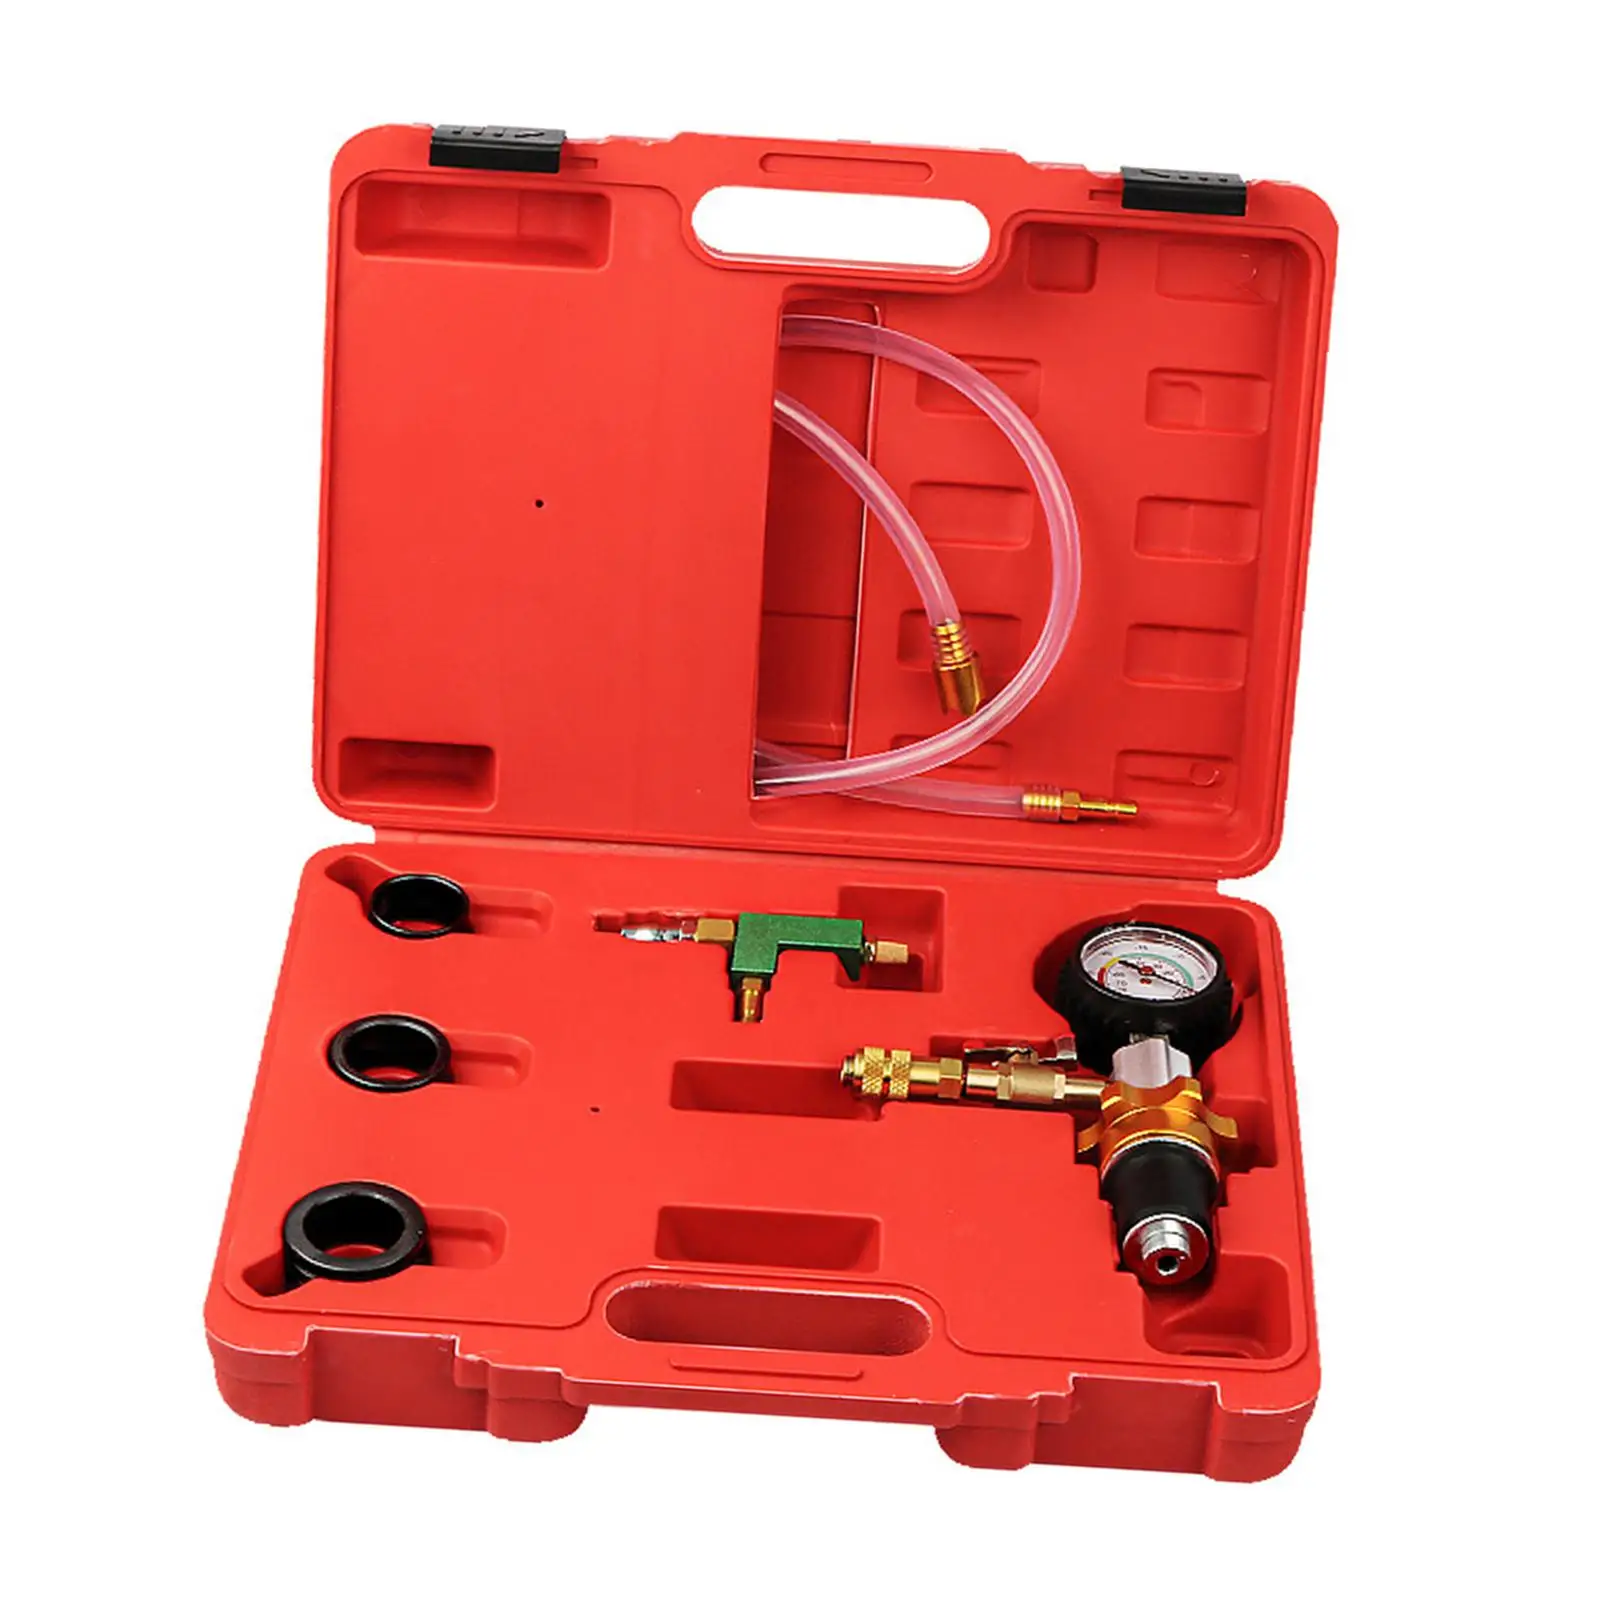 Vacuum Coolant Refill Tool set with A Soft Tube Leak Tester Professional Repair Radiator Pressure Tester for Cars Vehicle